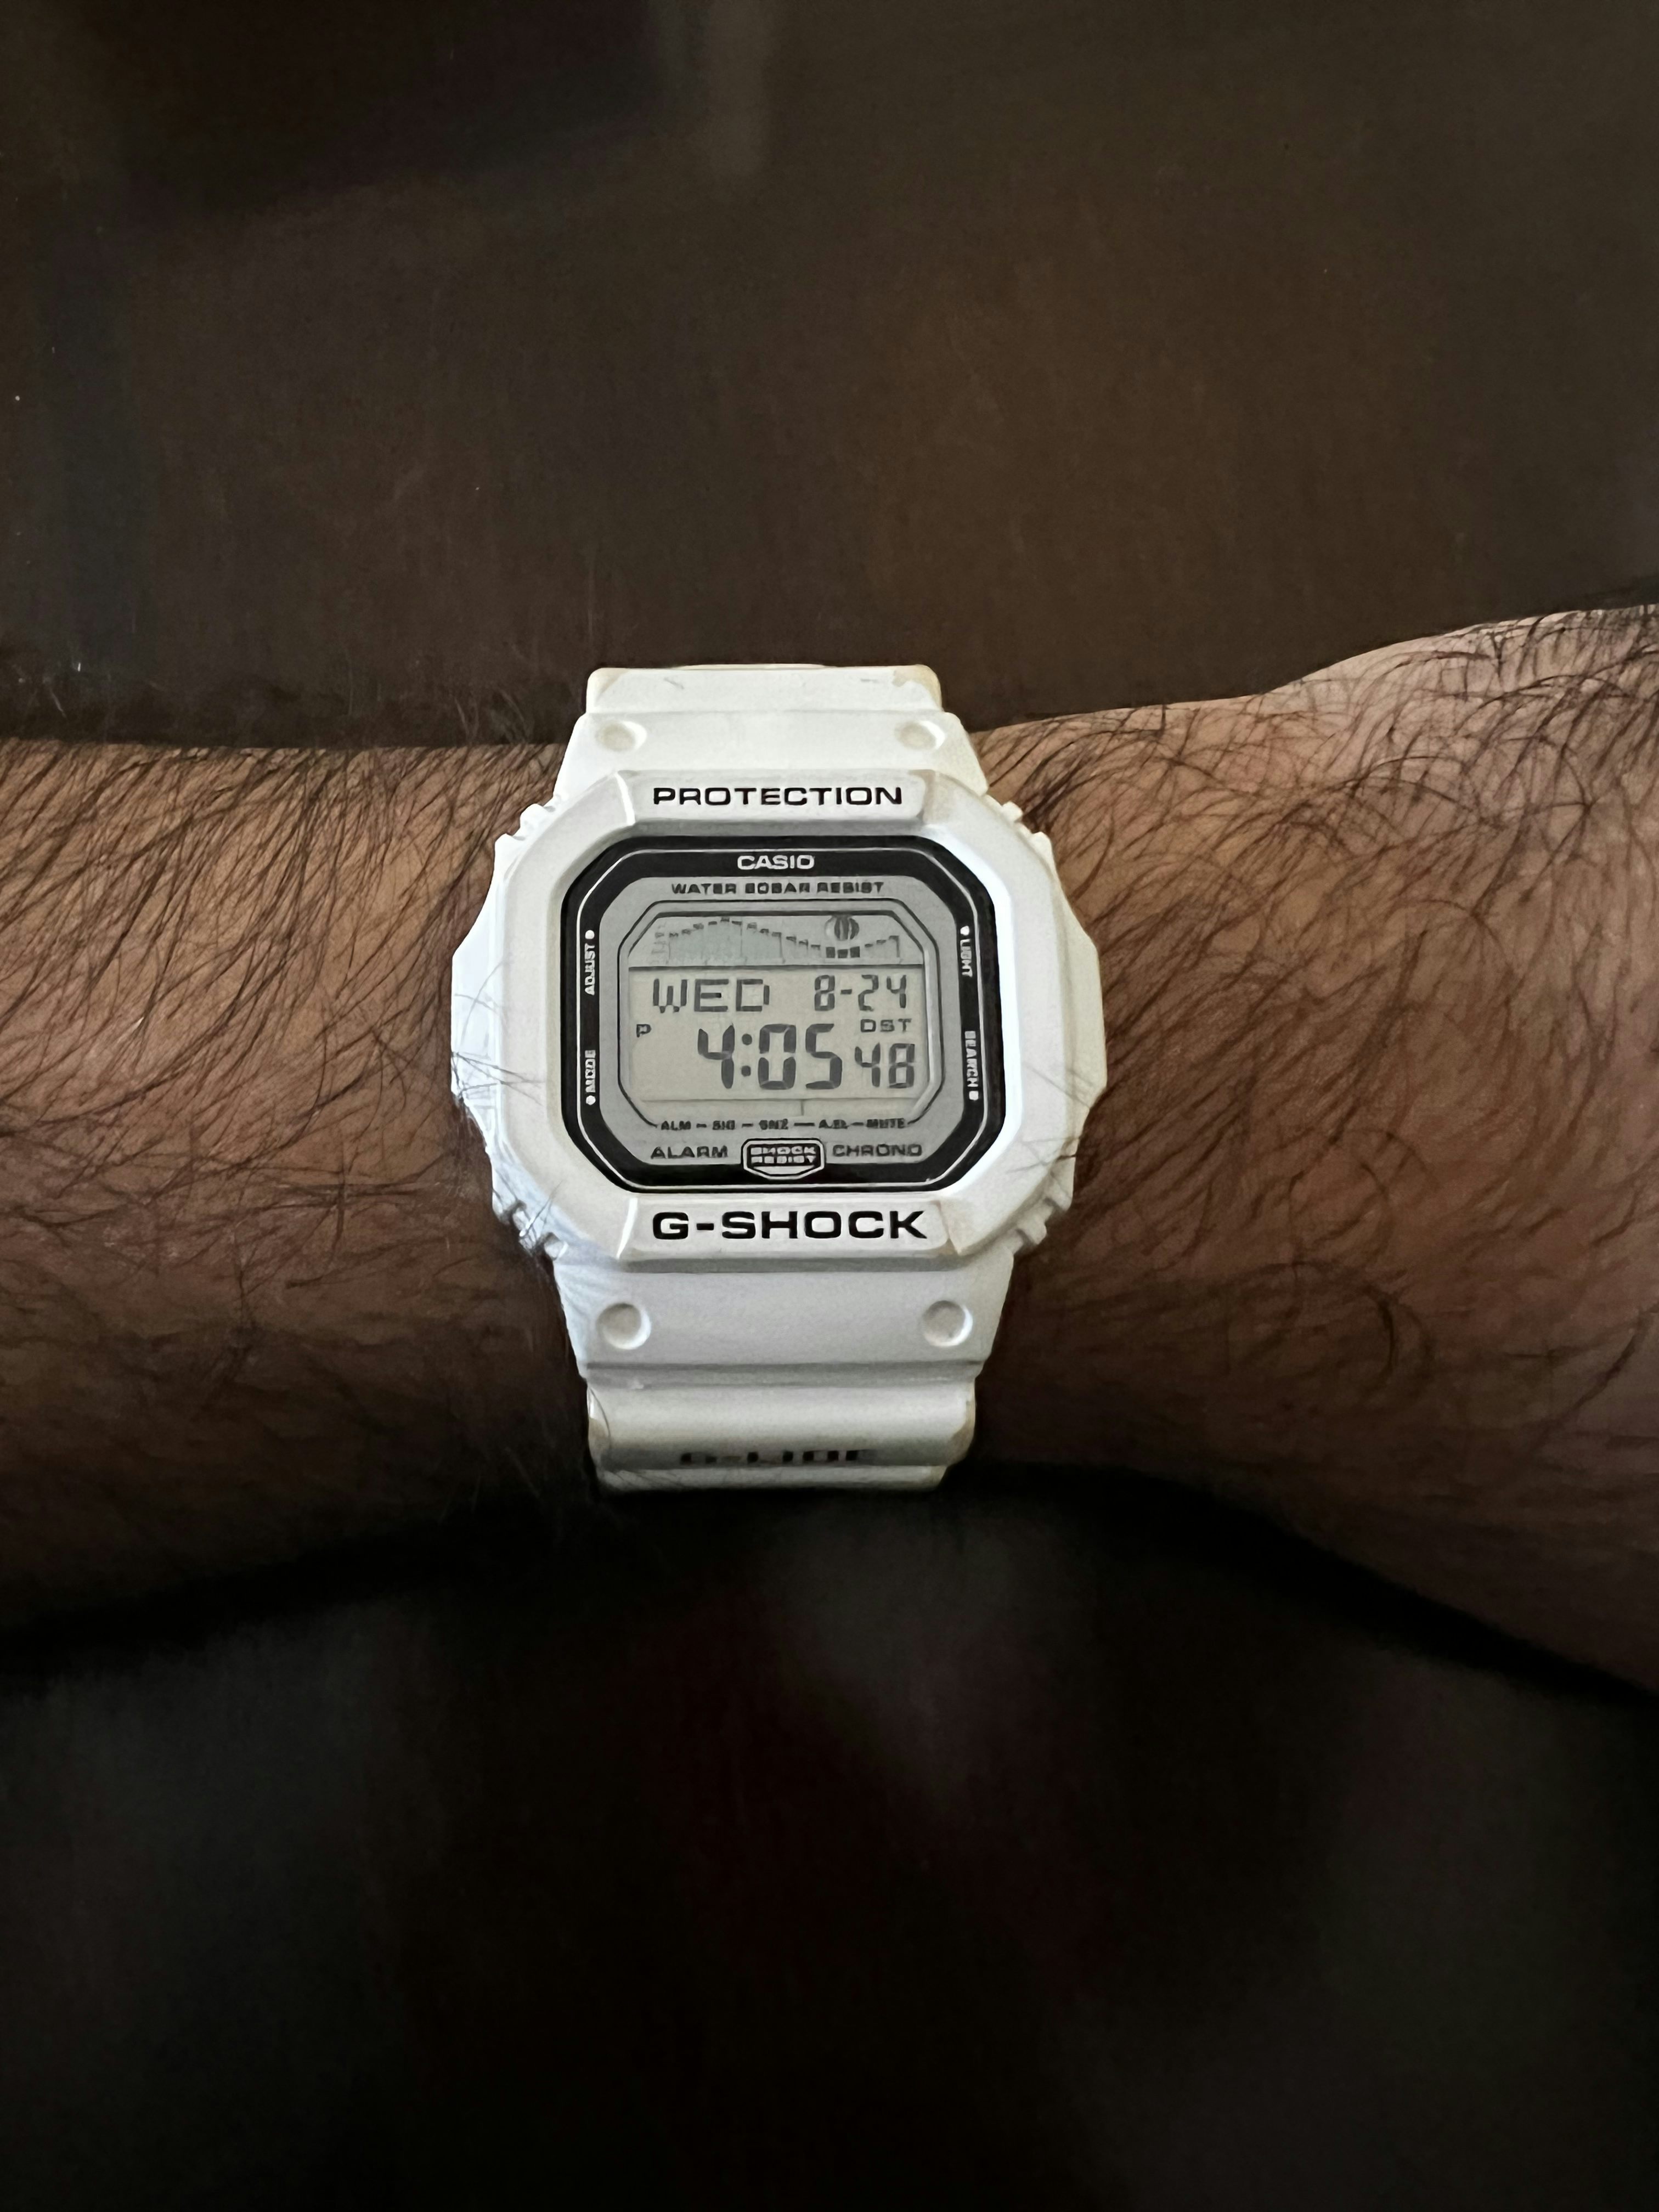 — G-Lide Hodinkee Casio (Formerly GLX-5600 by G-Shock owned Community